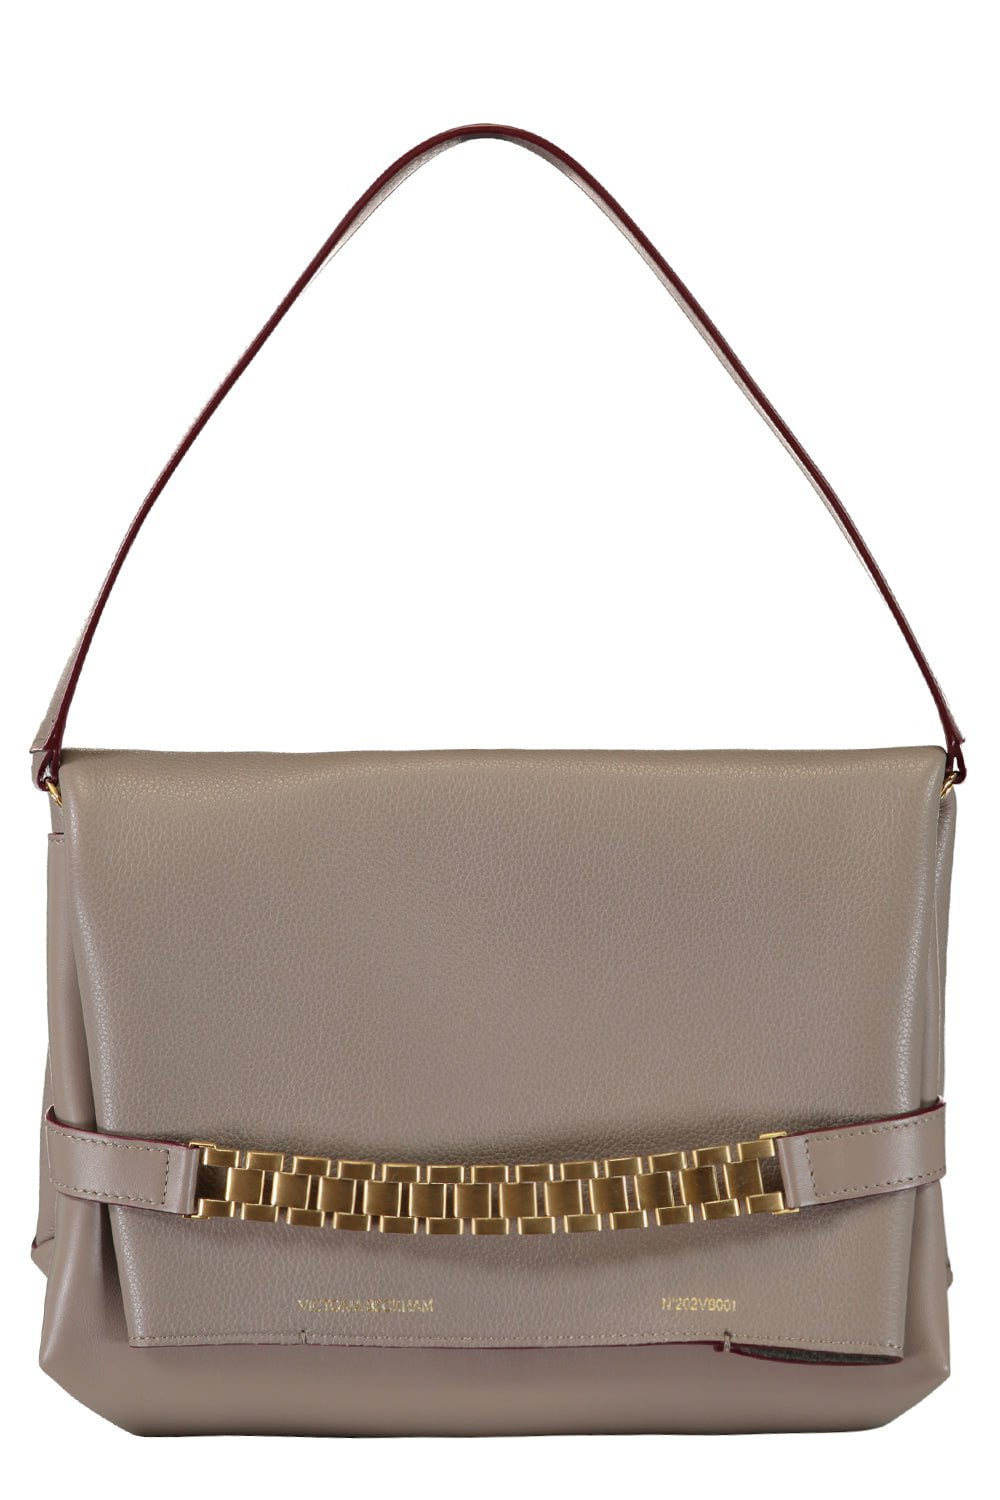 VICTORIA BECKHAM-Chain Pouch Shoulder Bag - Taupe-TAUPE